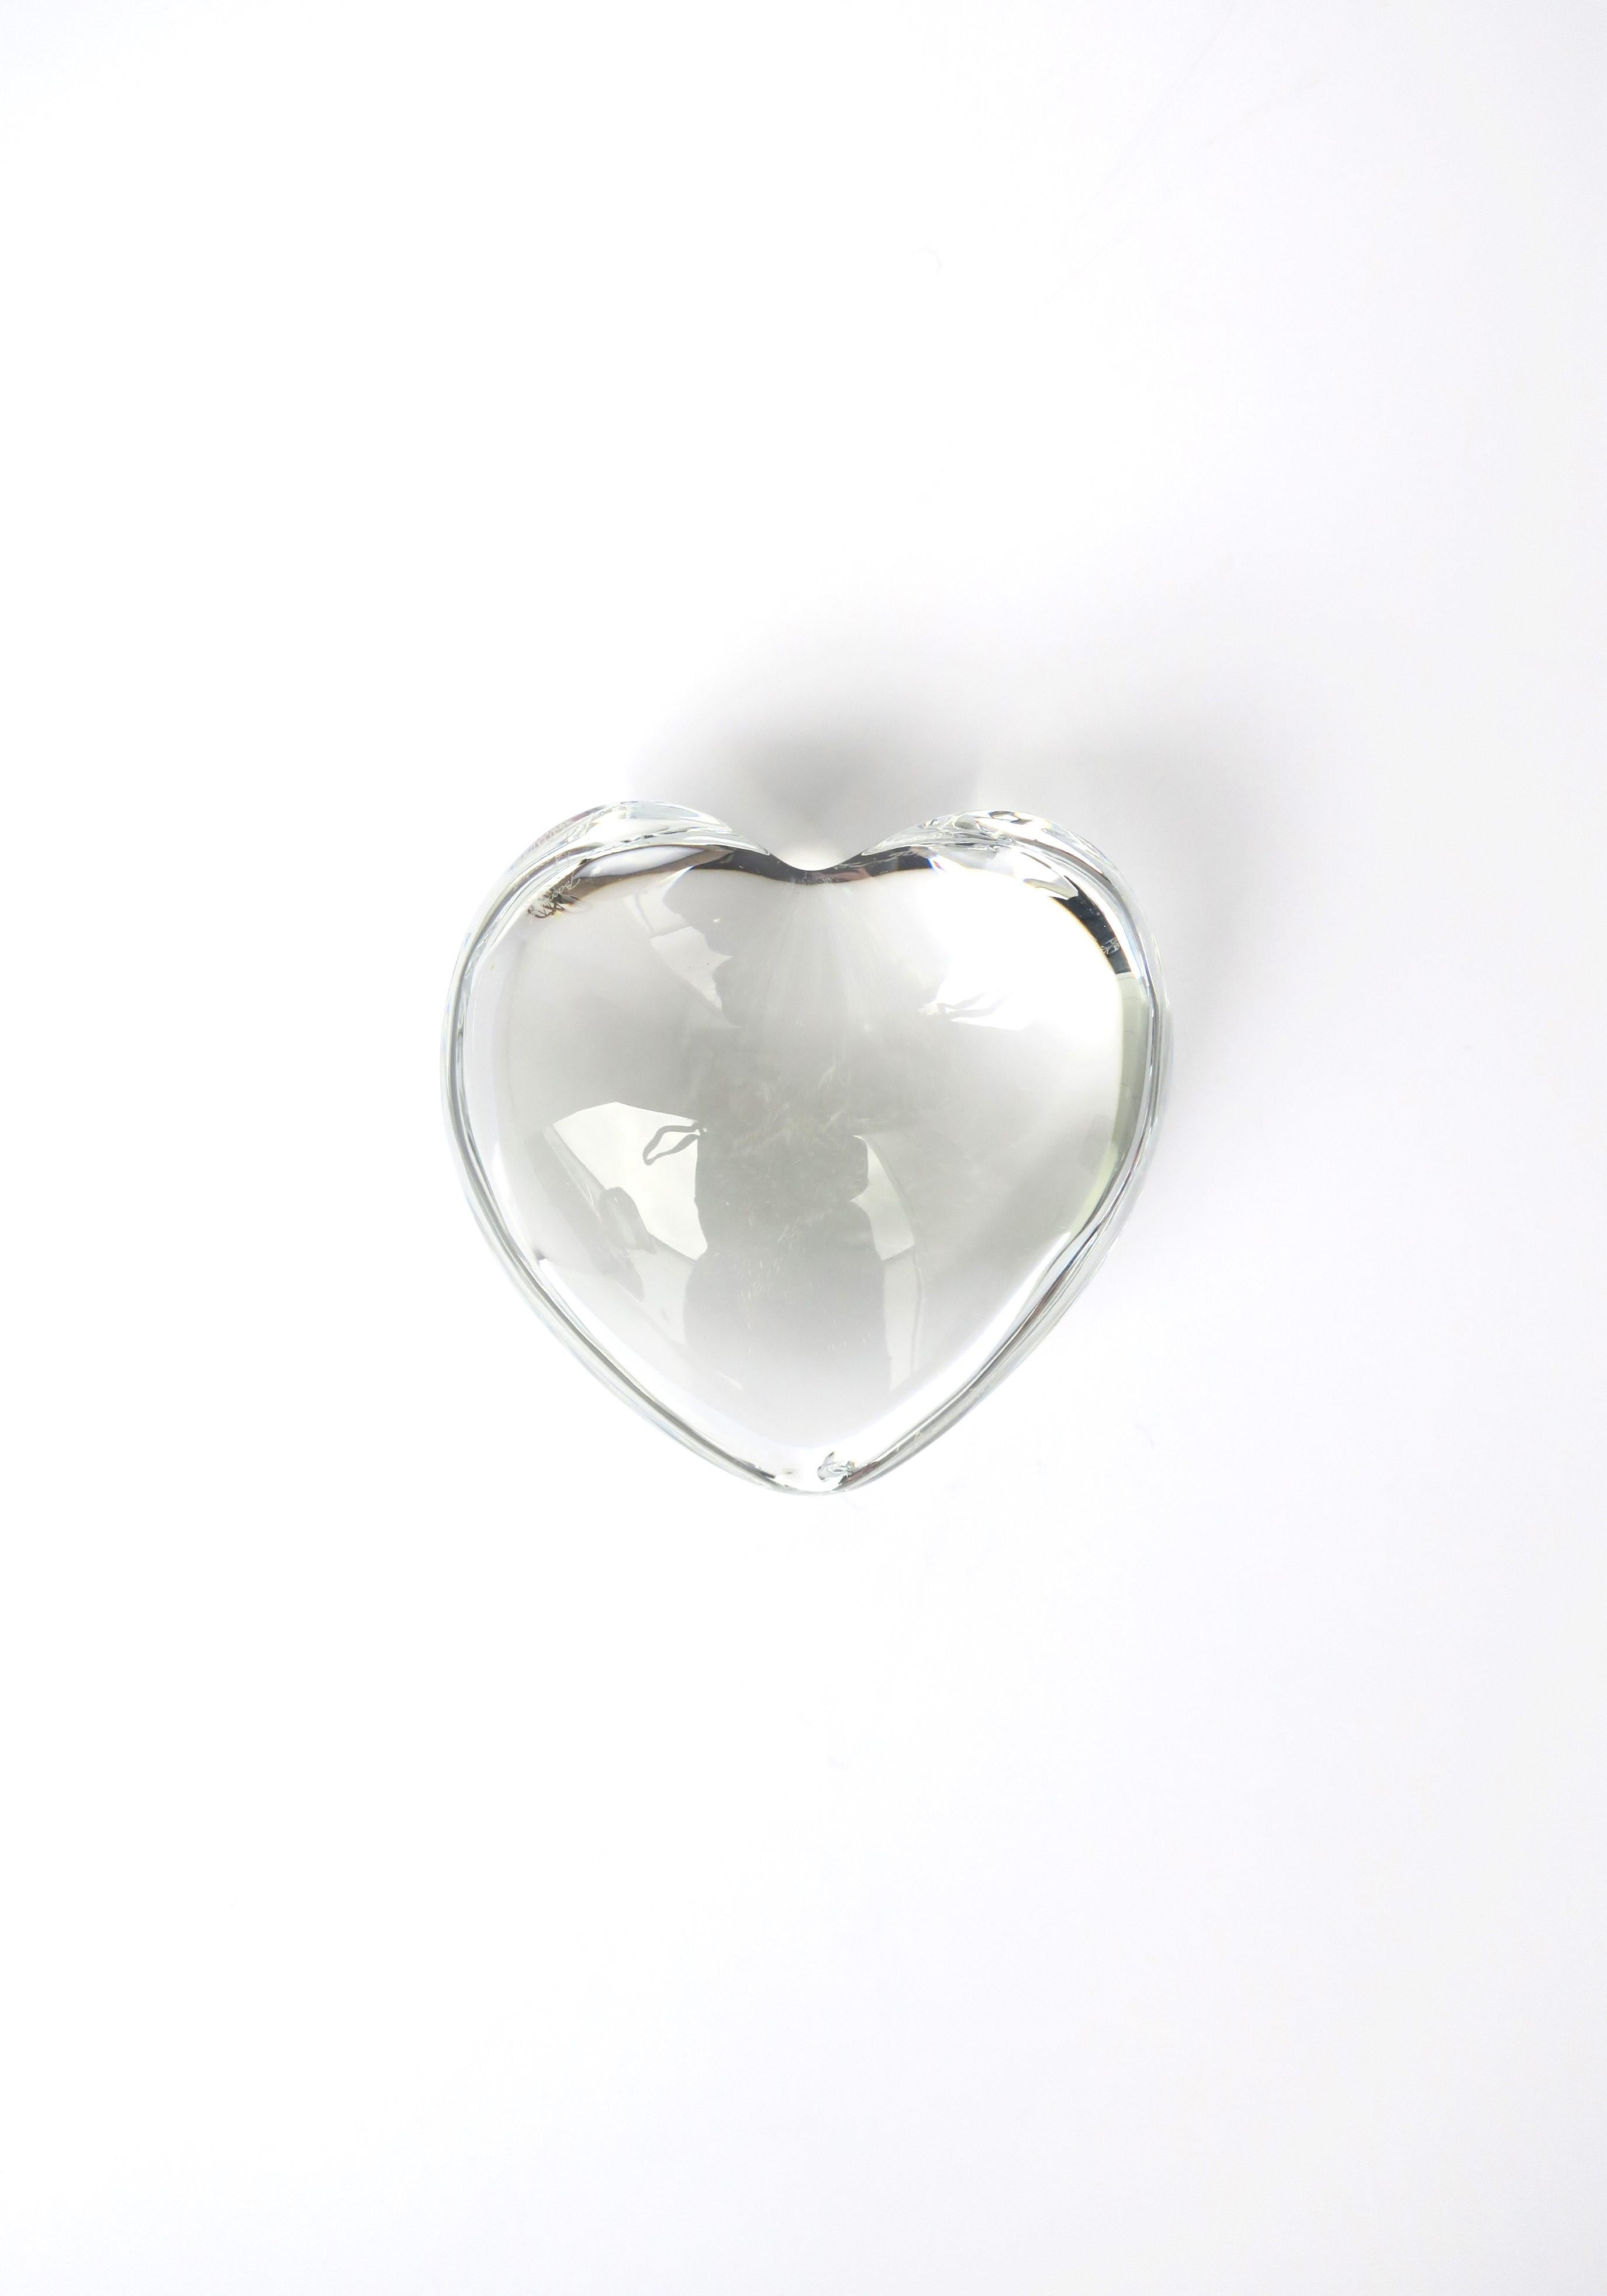 From French luxury crystal Maison Baccarat, a beautiful clear transparent puffed heart paperweight or decorative object, circa early 21st century, France. Heart is laser cut with small 